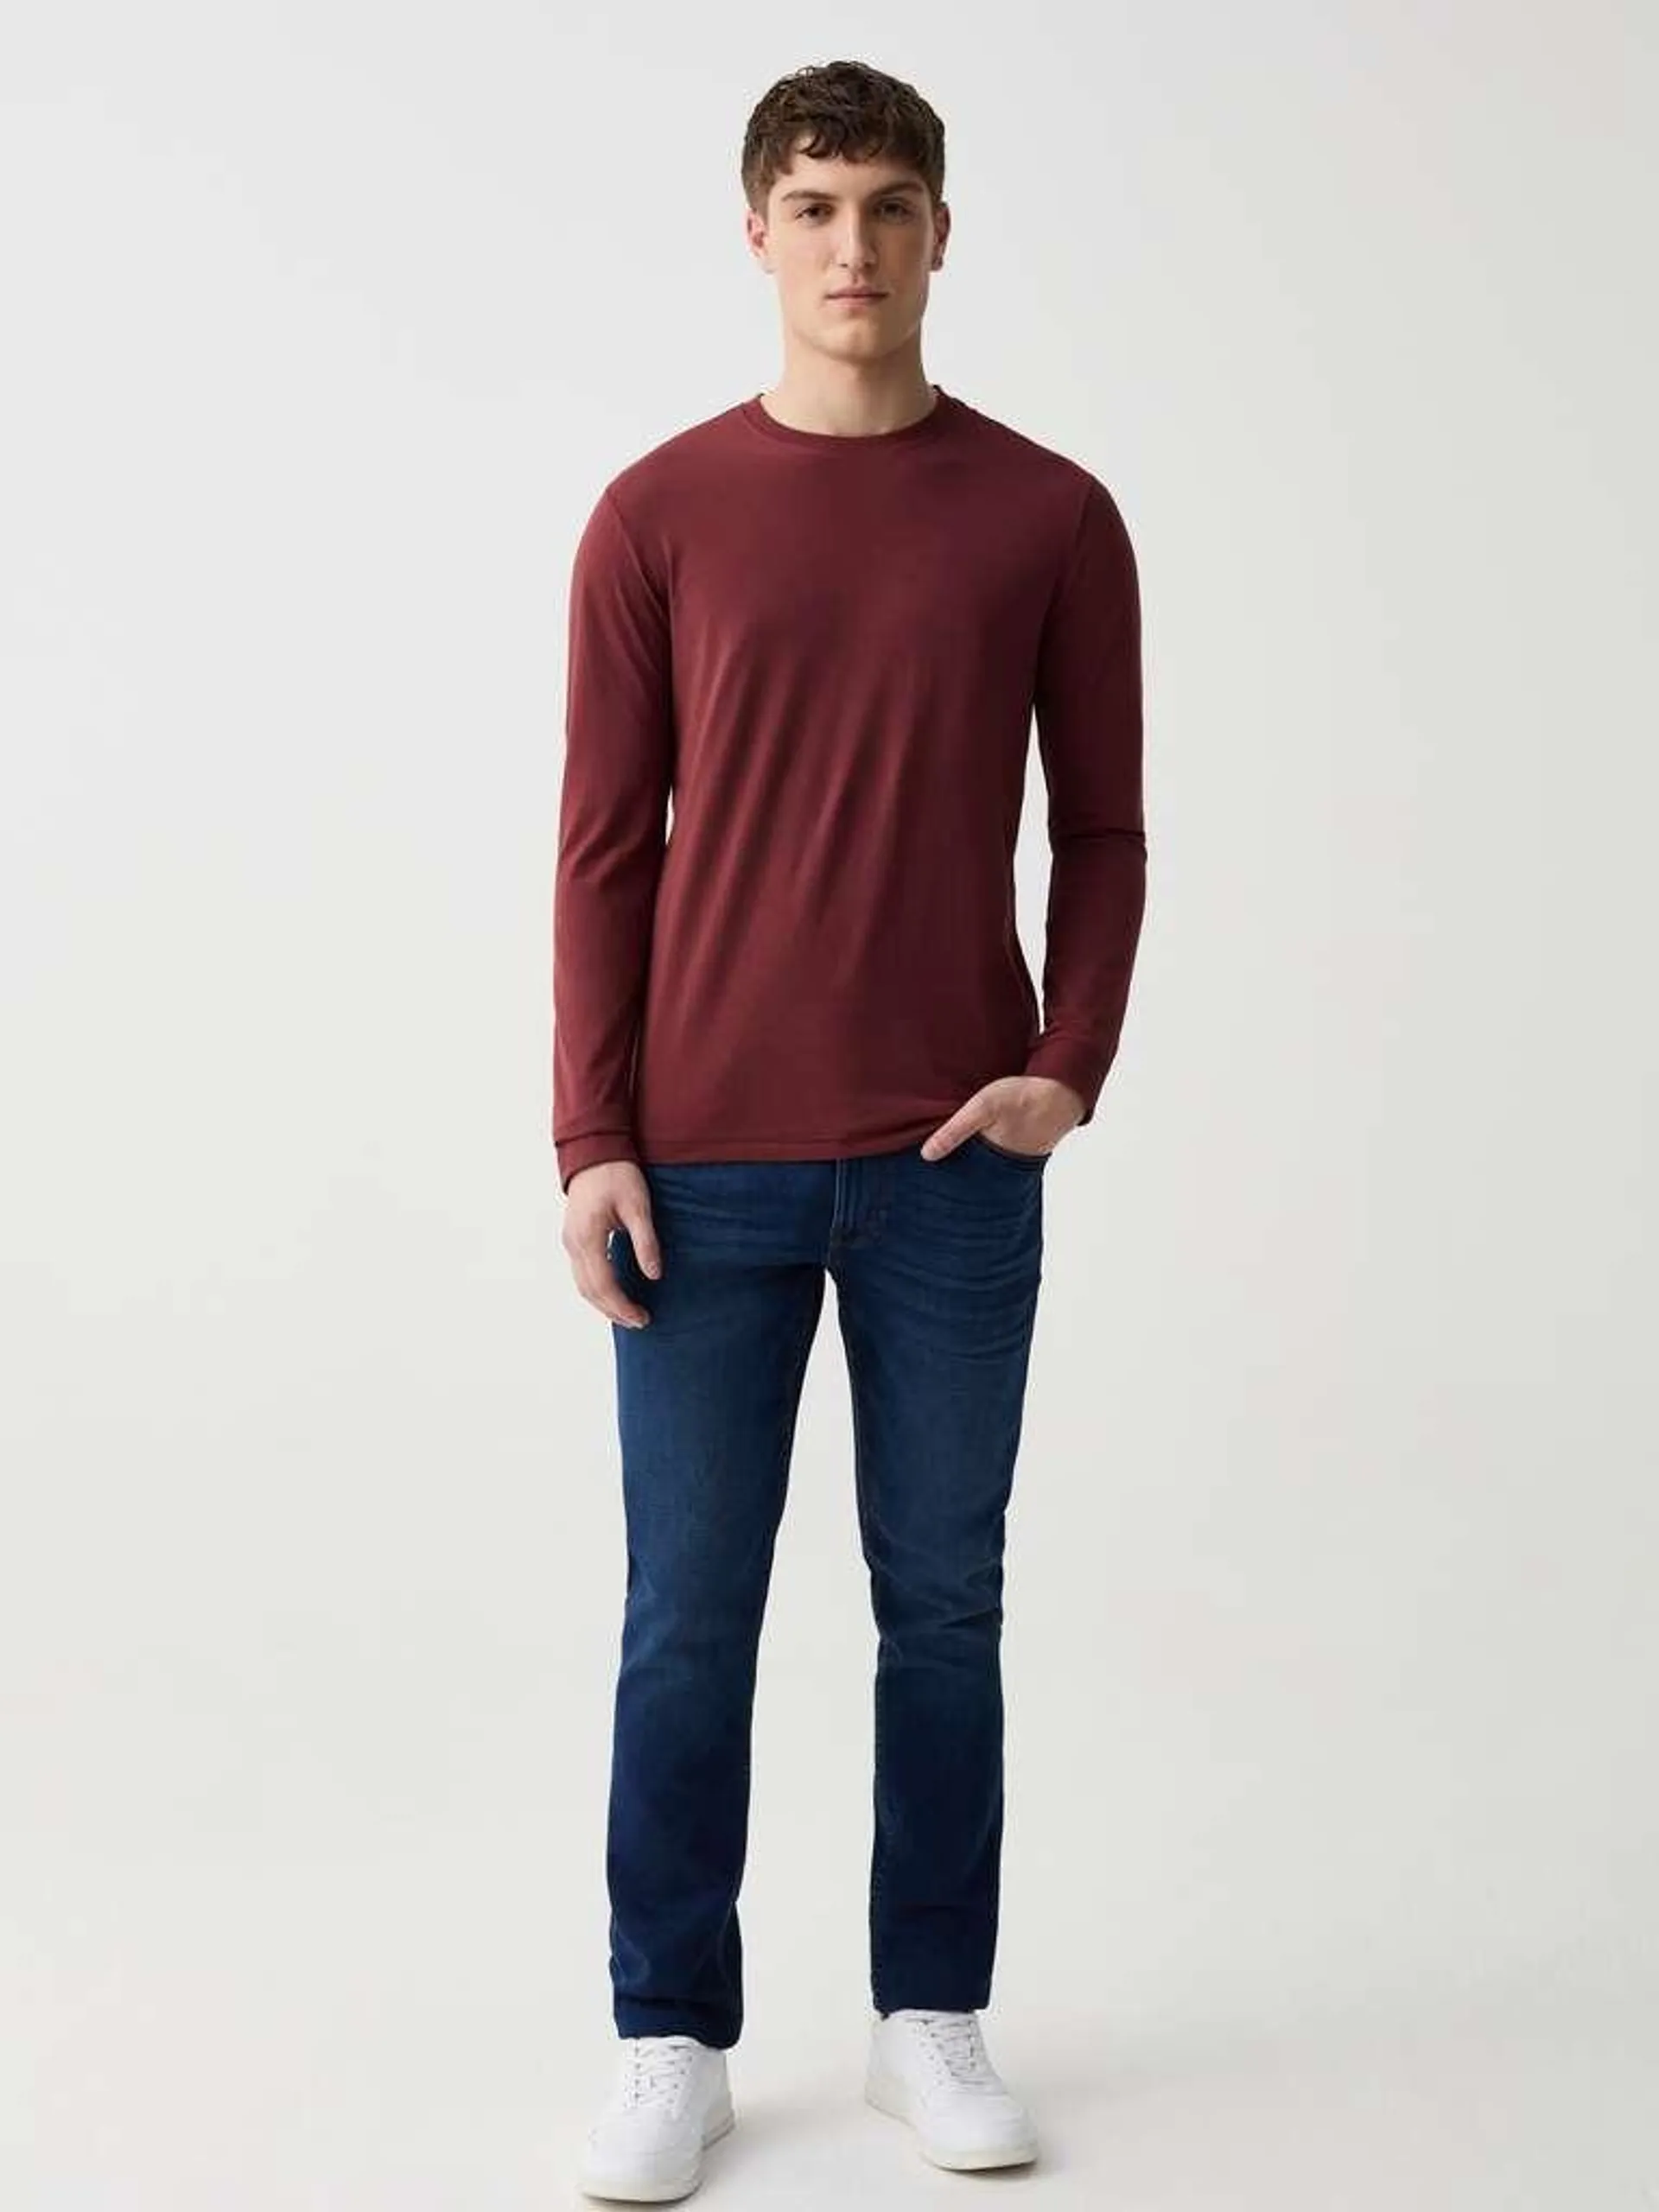 Brick Red Long-sleeved T-shirt with round neck